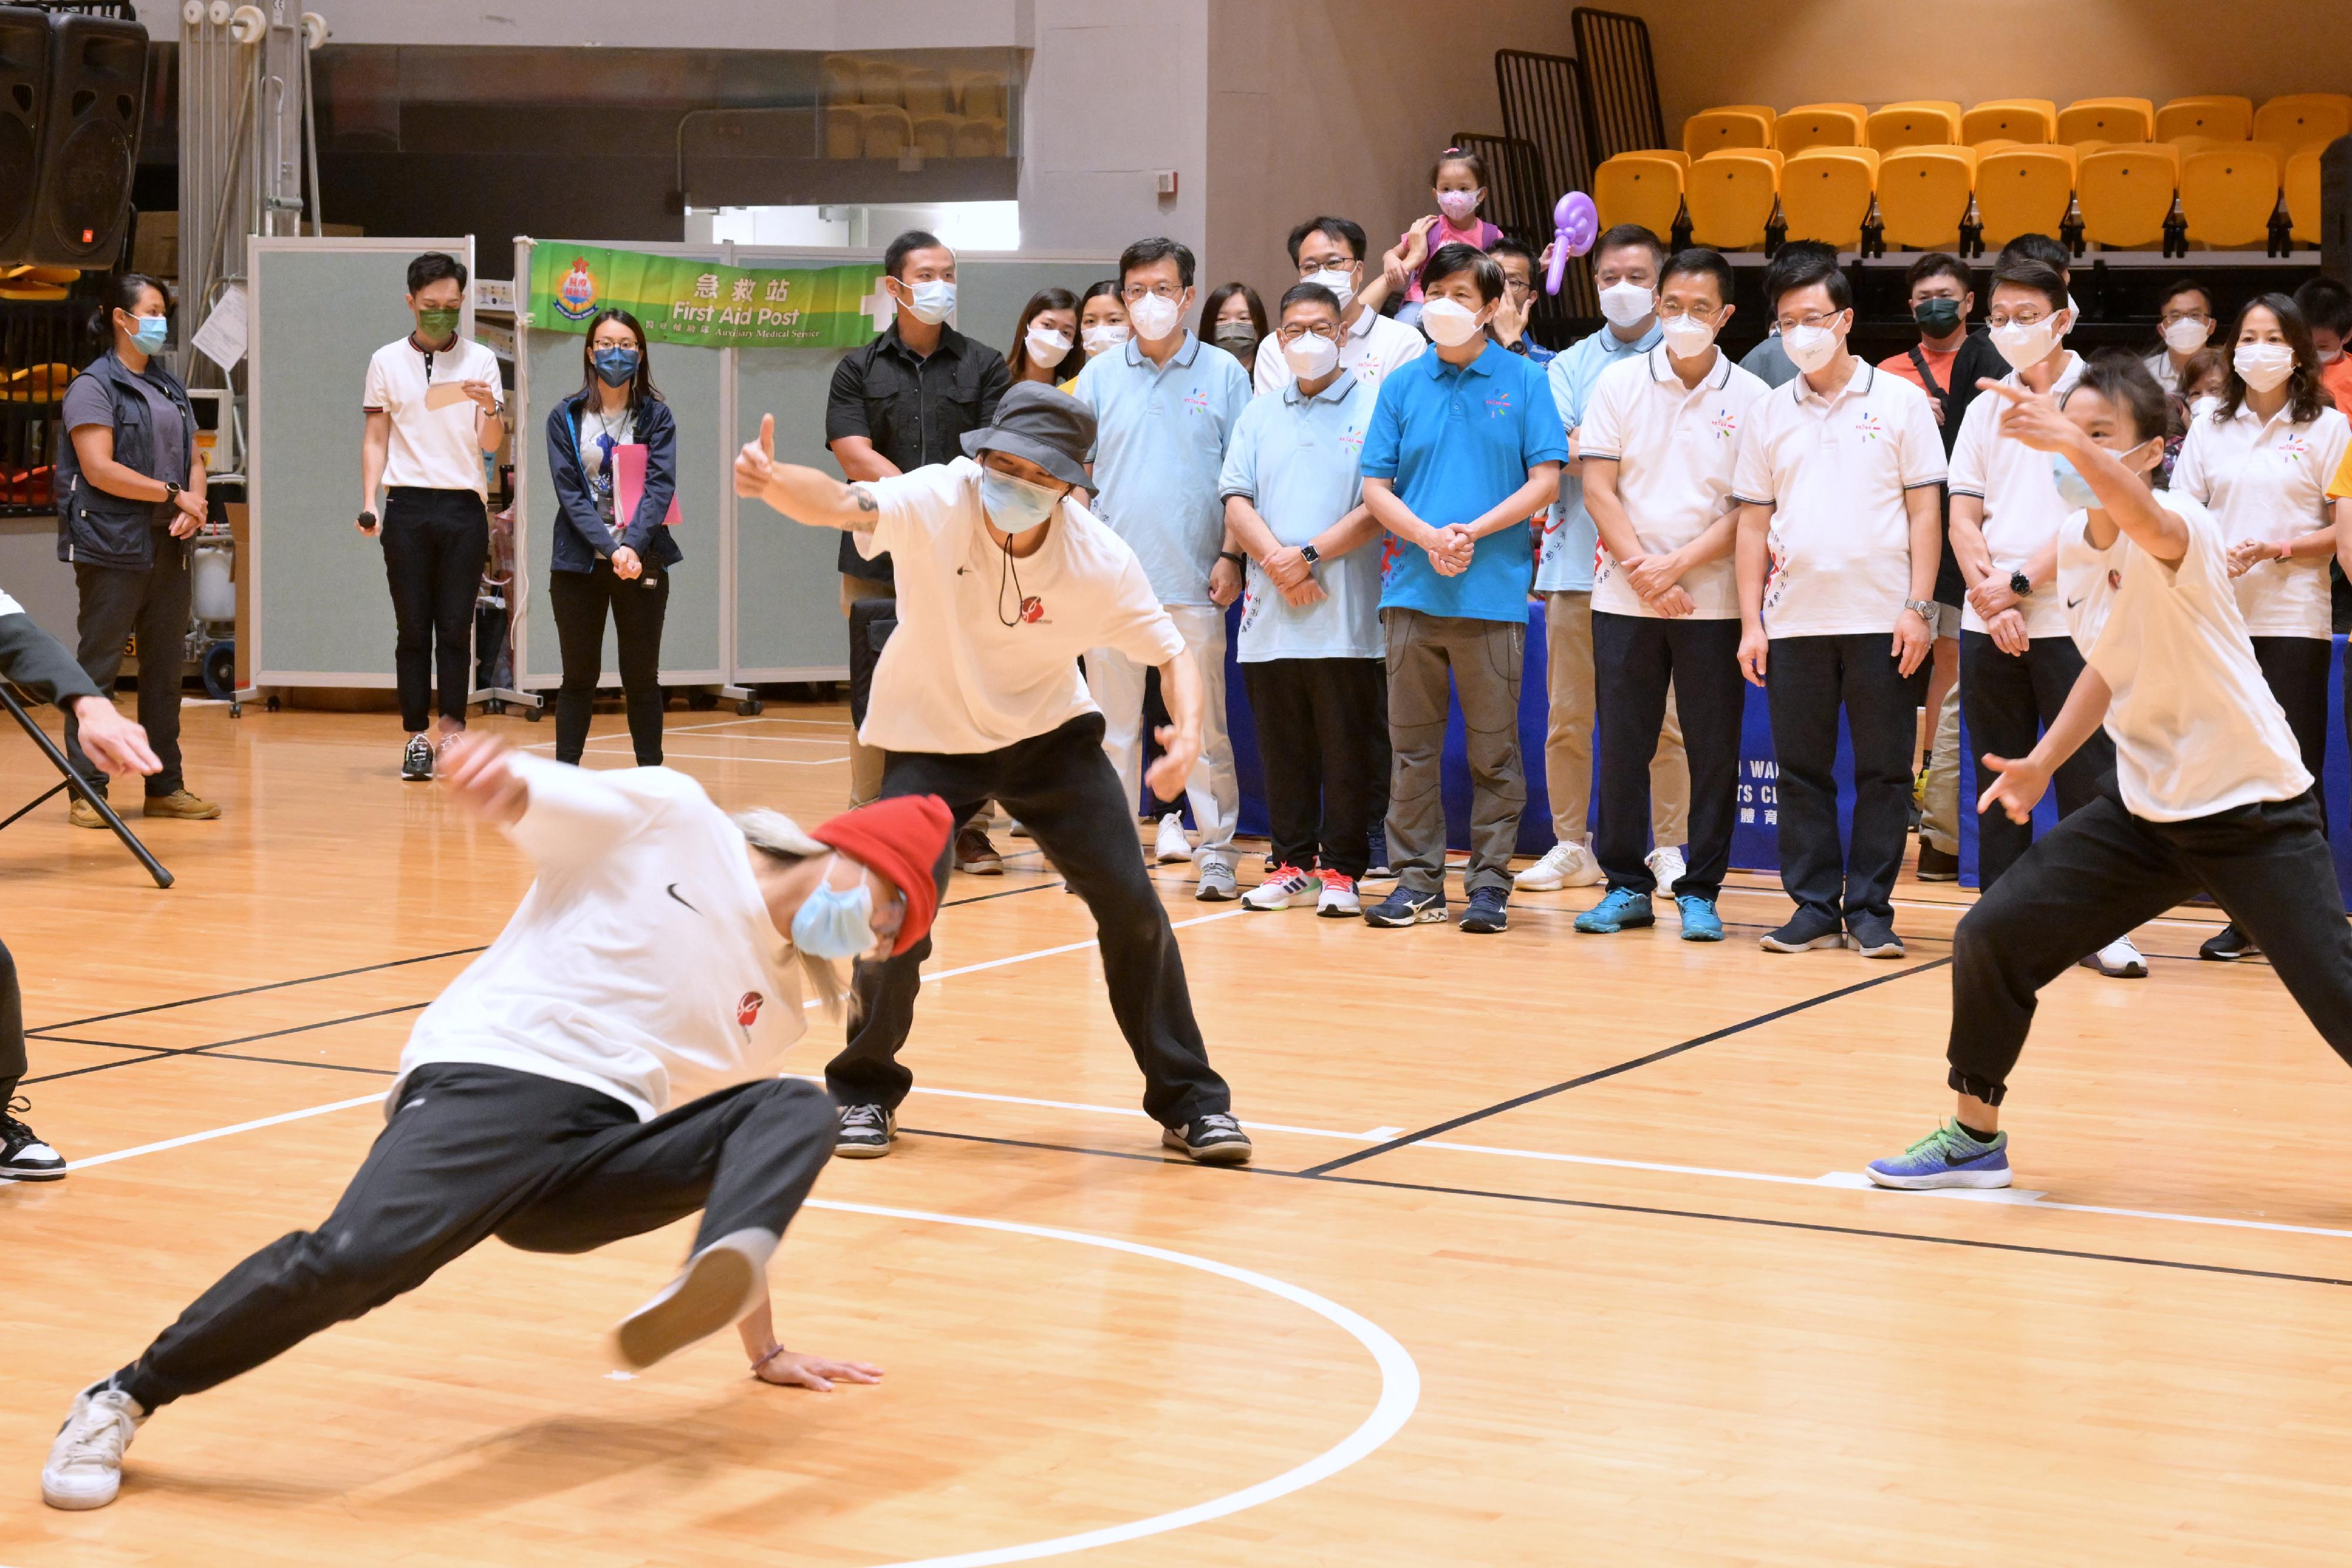 The Chief Executive, Mr John Lee, joined the public for sports and recreation programmes at Tsuen Wan Sports Centre this afternoon (August 7) as part of Sport For All Day 2022 organised by the Leisure and Cultural Services Department. Photo shows Mr Lee (back row, third right) and other guests watching breaking performance.